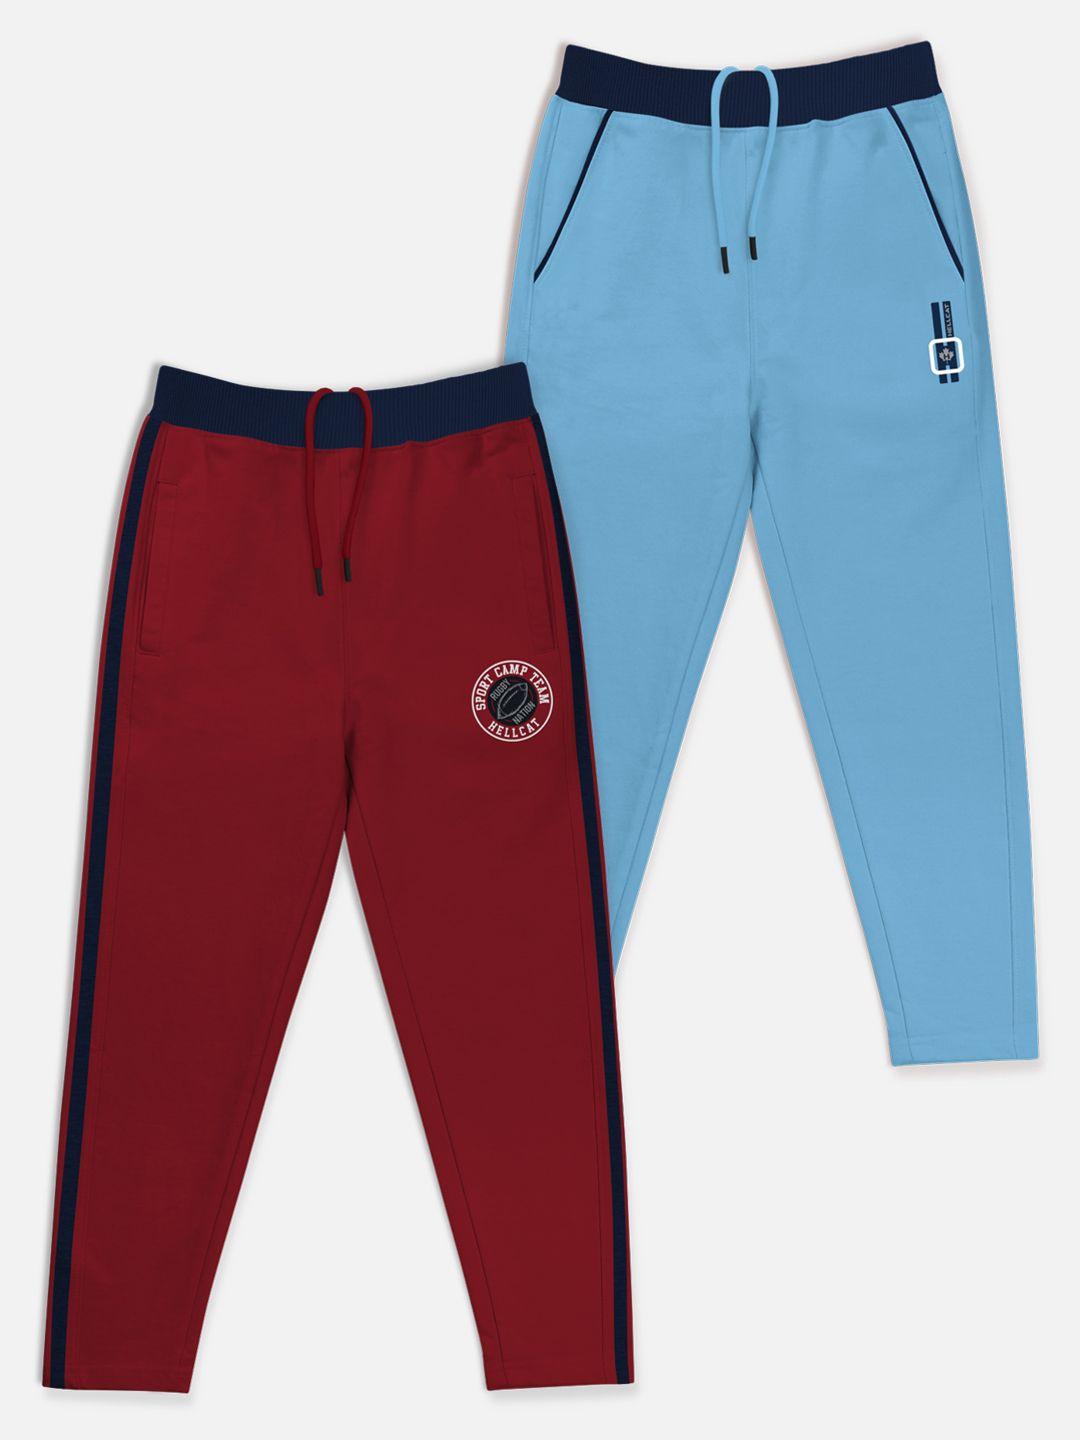 hellcat boys pack of 3 cotton track pants